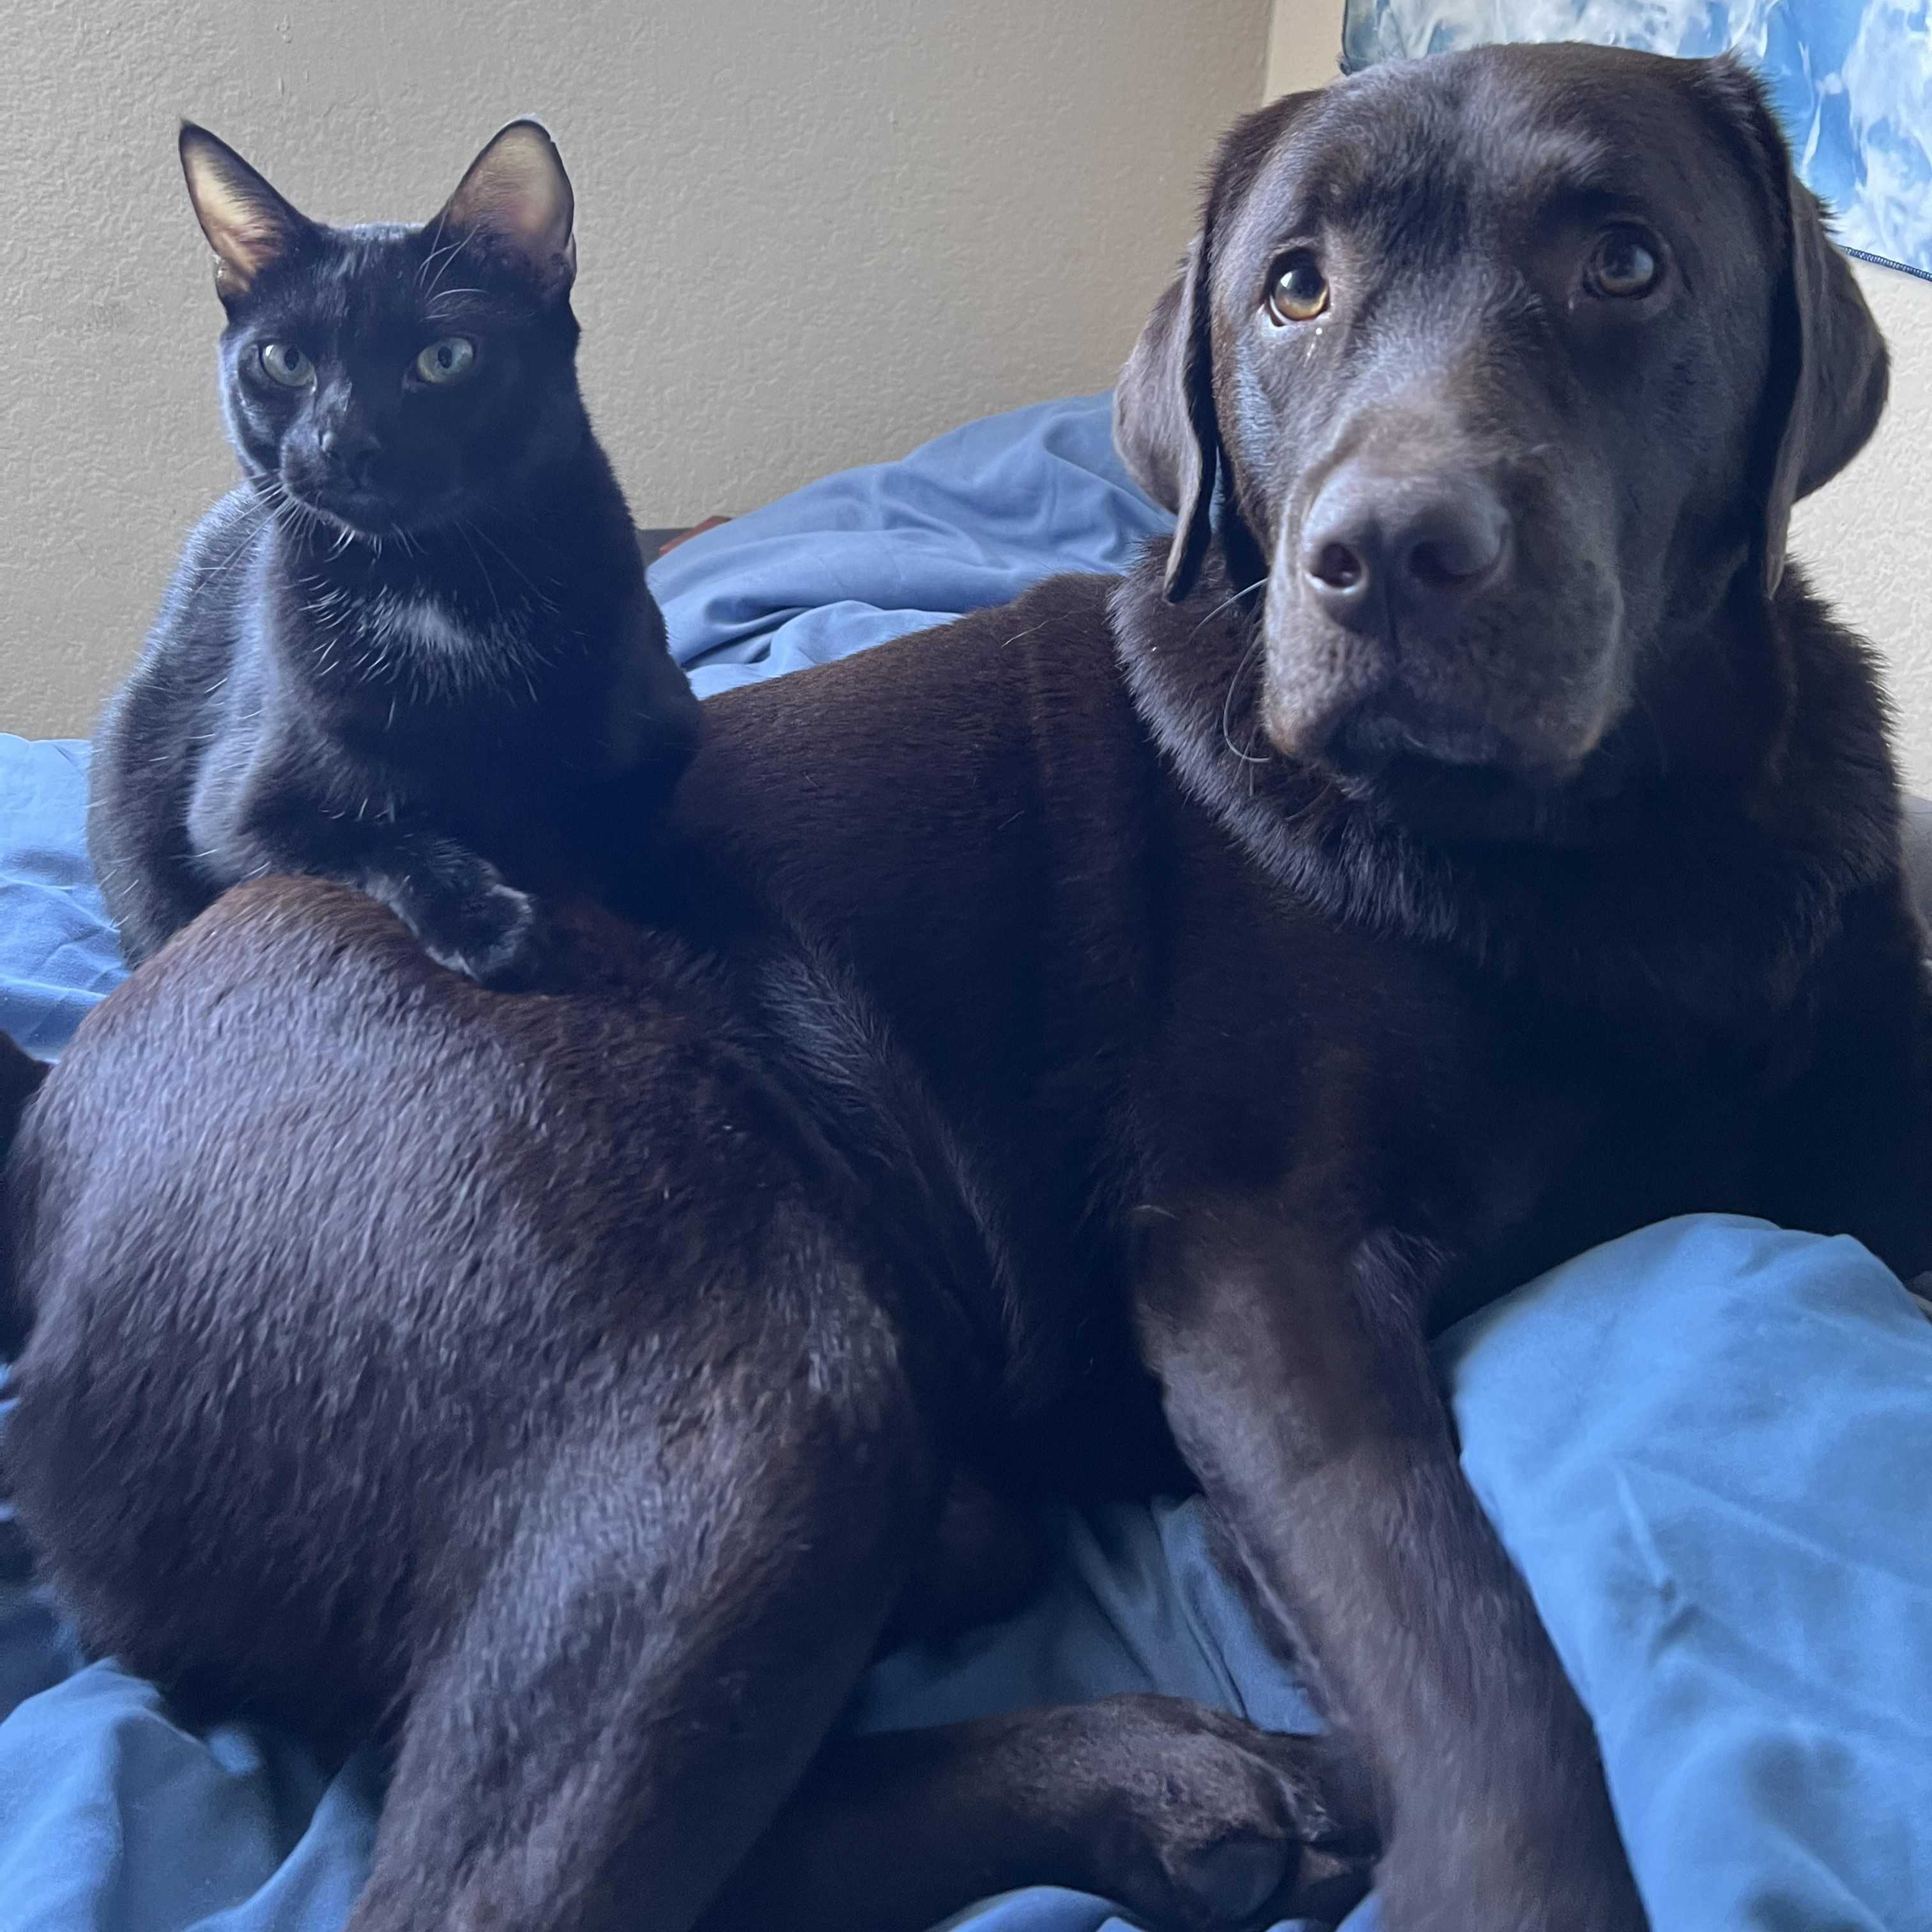 A chocolate lab, Ezran, laying on a bed with a blue comforter with a black cat, Savi, laying on top of Ezran. Both are looking calmly at the camera.